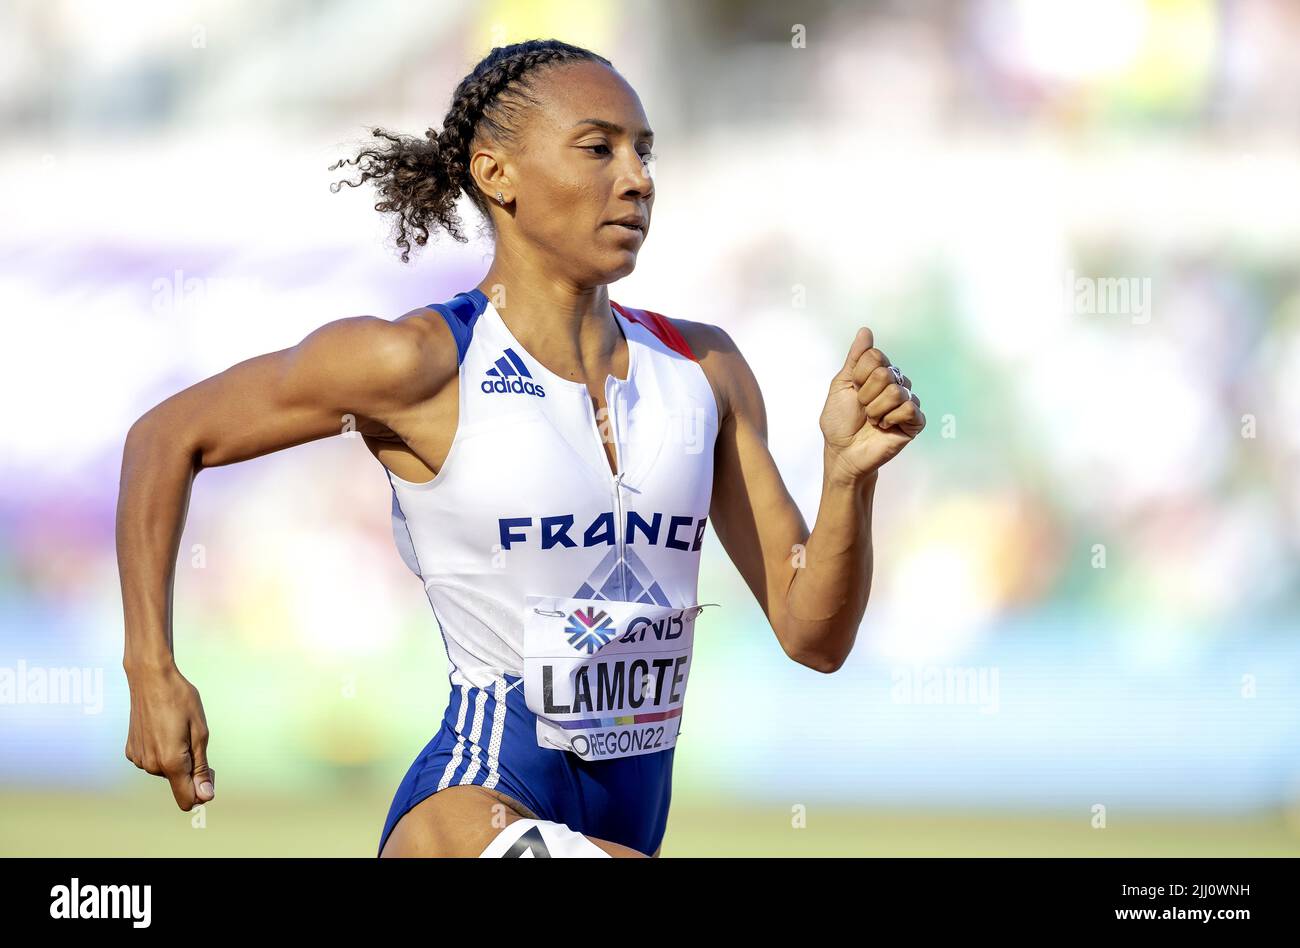 2022-07-22 02:35:46 EUGENE - Renelle Lamote (FRA) in action during the 800m series on the seventh day of the World Athletics Championships at Hayward Field stadium. ANP ROBIN VAN LONKHUIJSEN netherlands out - belgium out Stock Photo